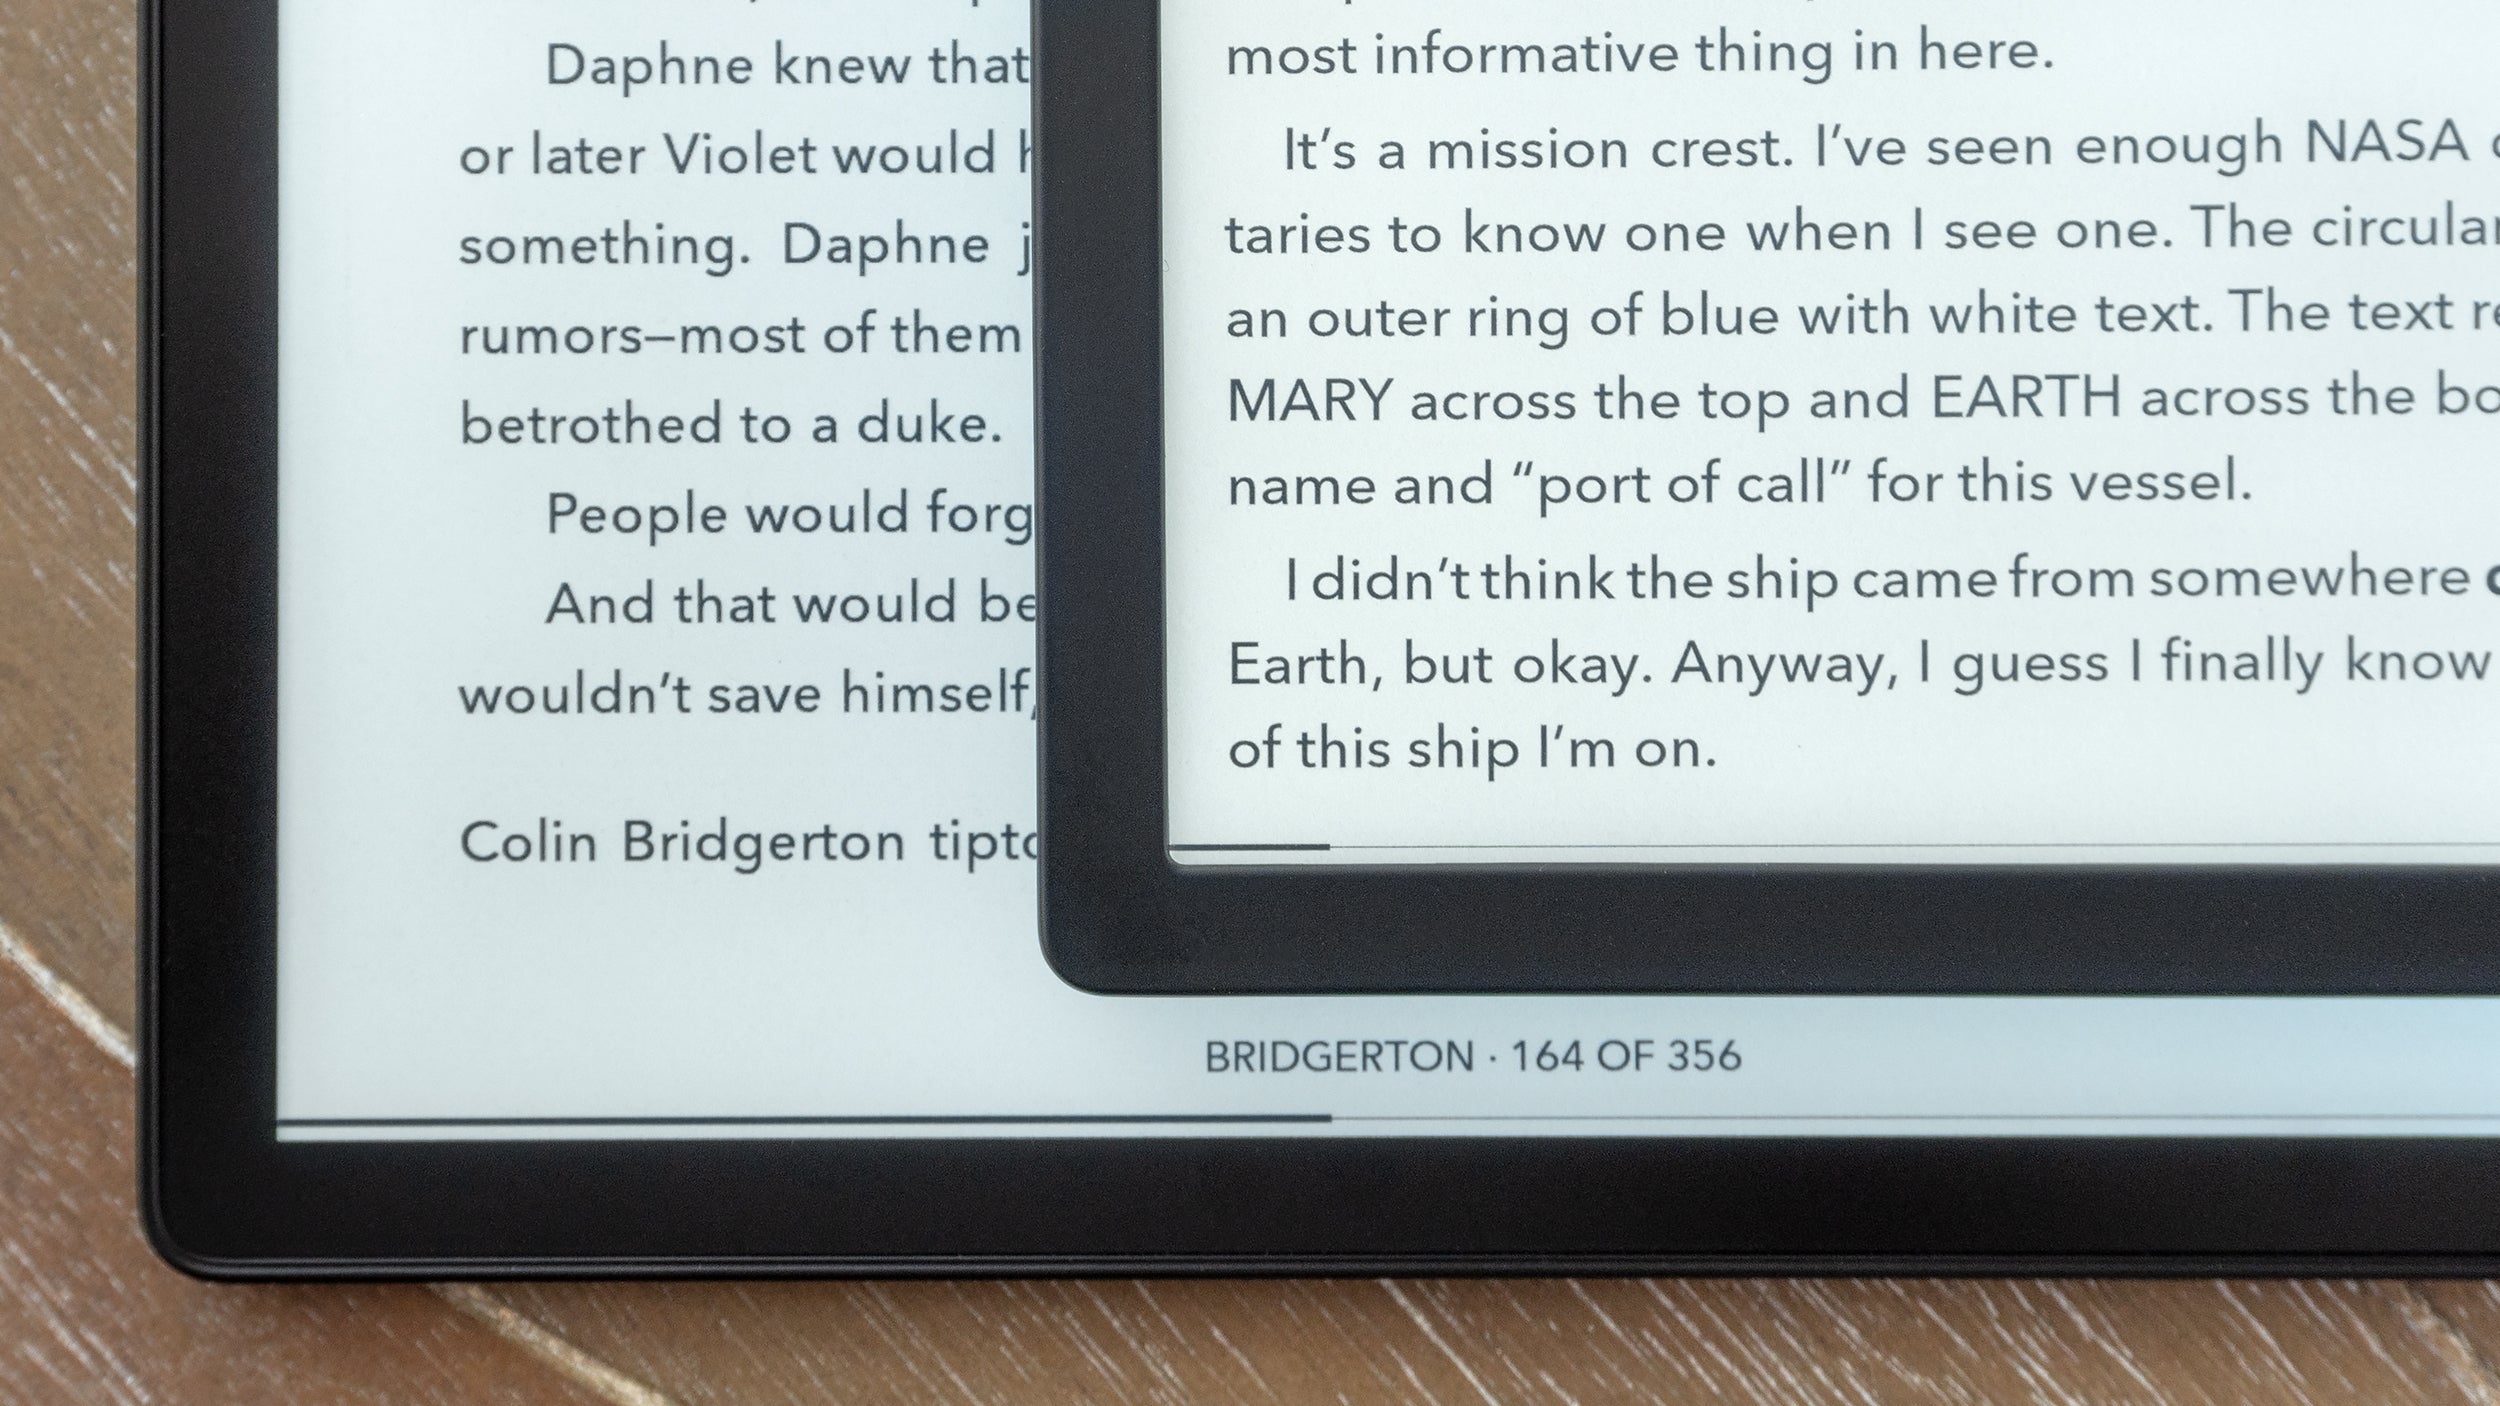 The Kobo Forma offers slightly higher screen resolution than the Kobo Elipsa, but the difference is negligible. (Photo: Andrew Liszewski/Gizmodo)